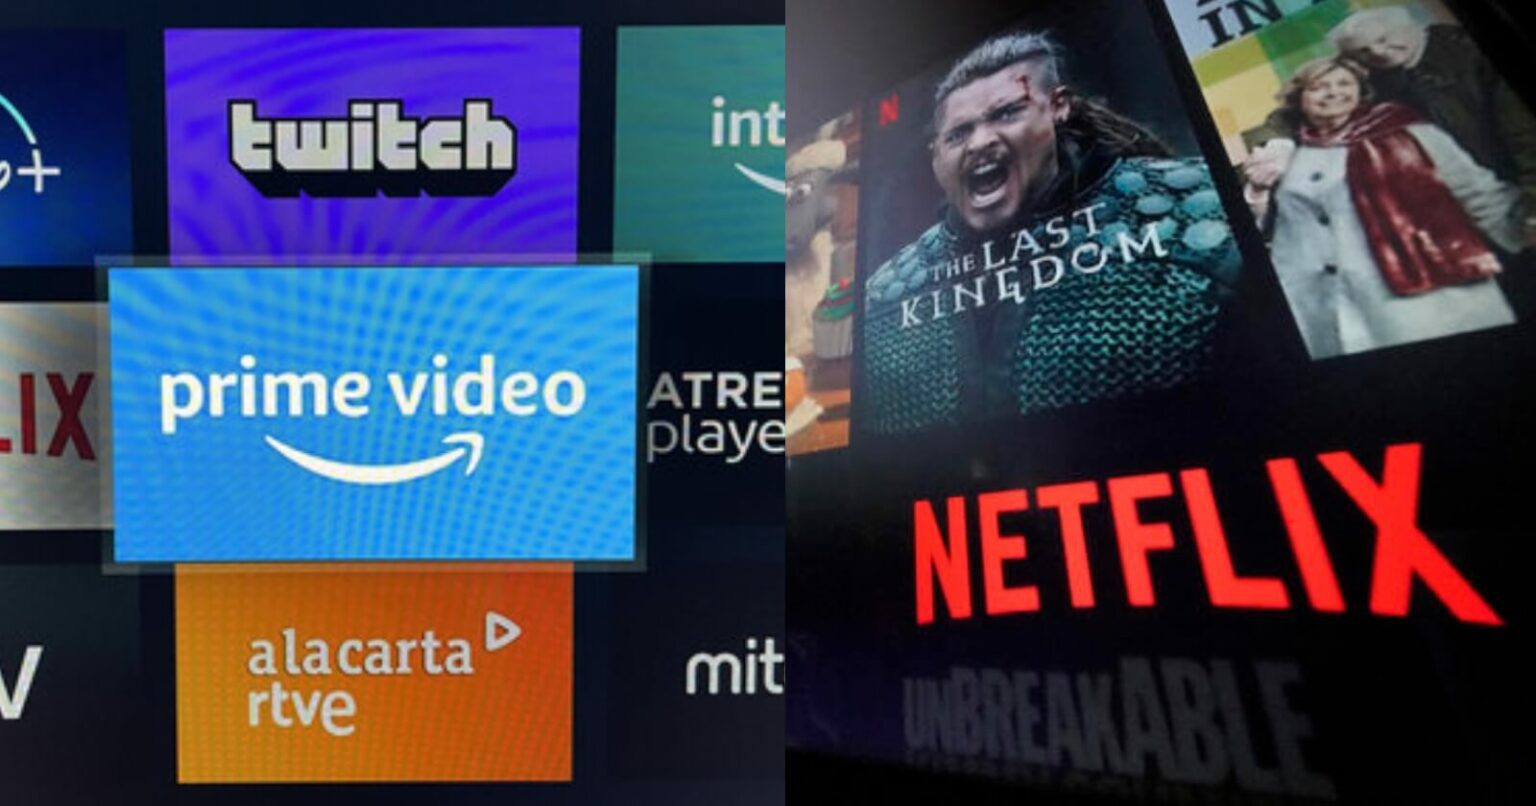 Netflix GST: Now you will have to pay more to use Netflix Amazon Prime!